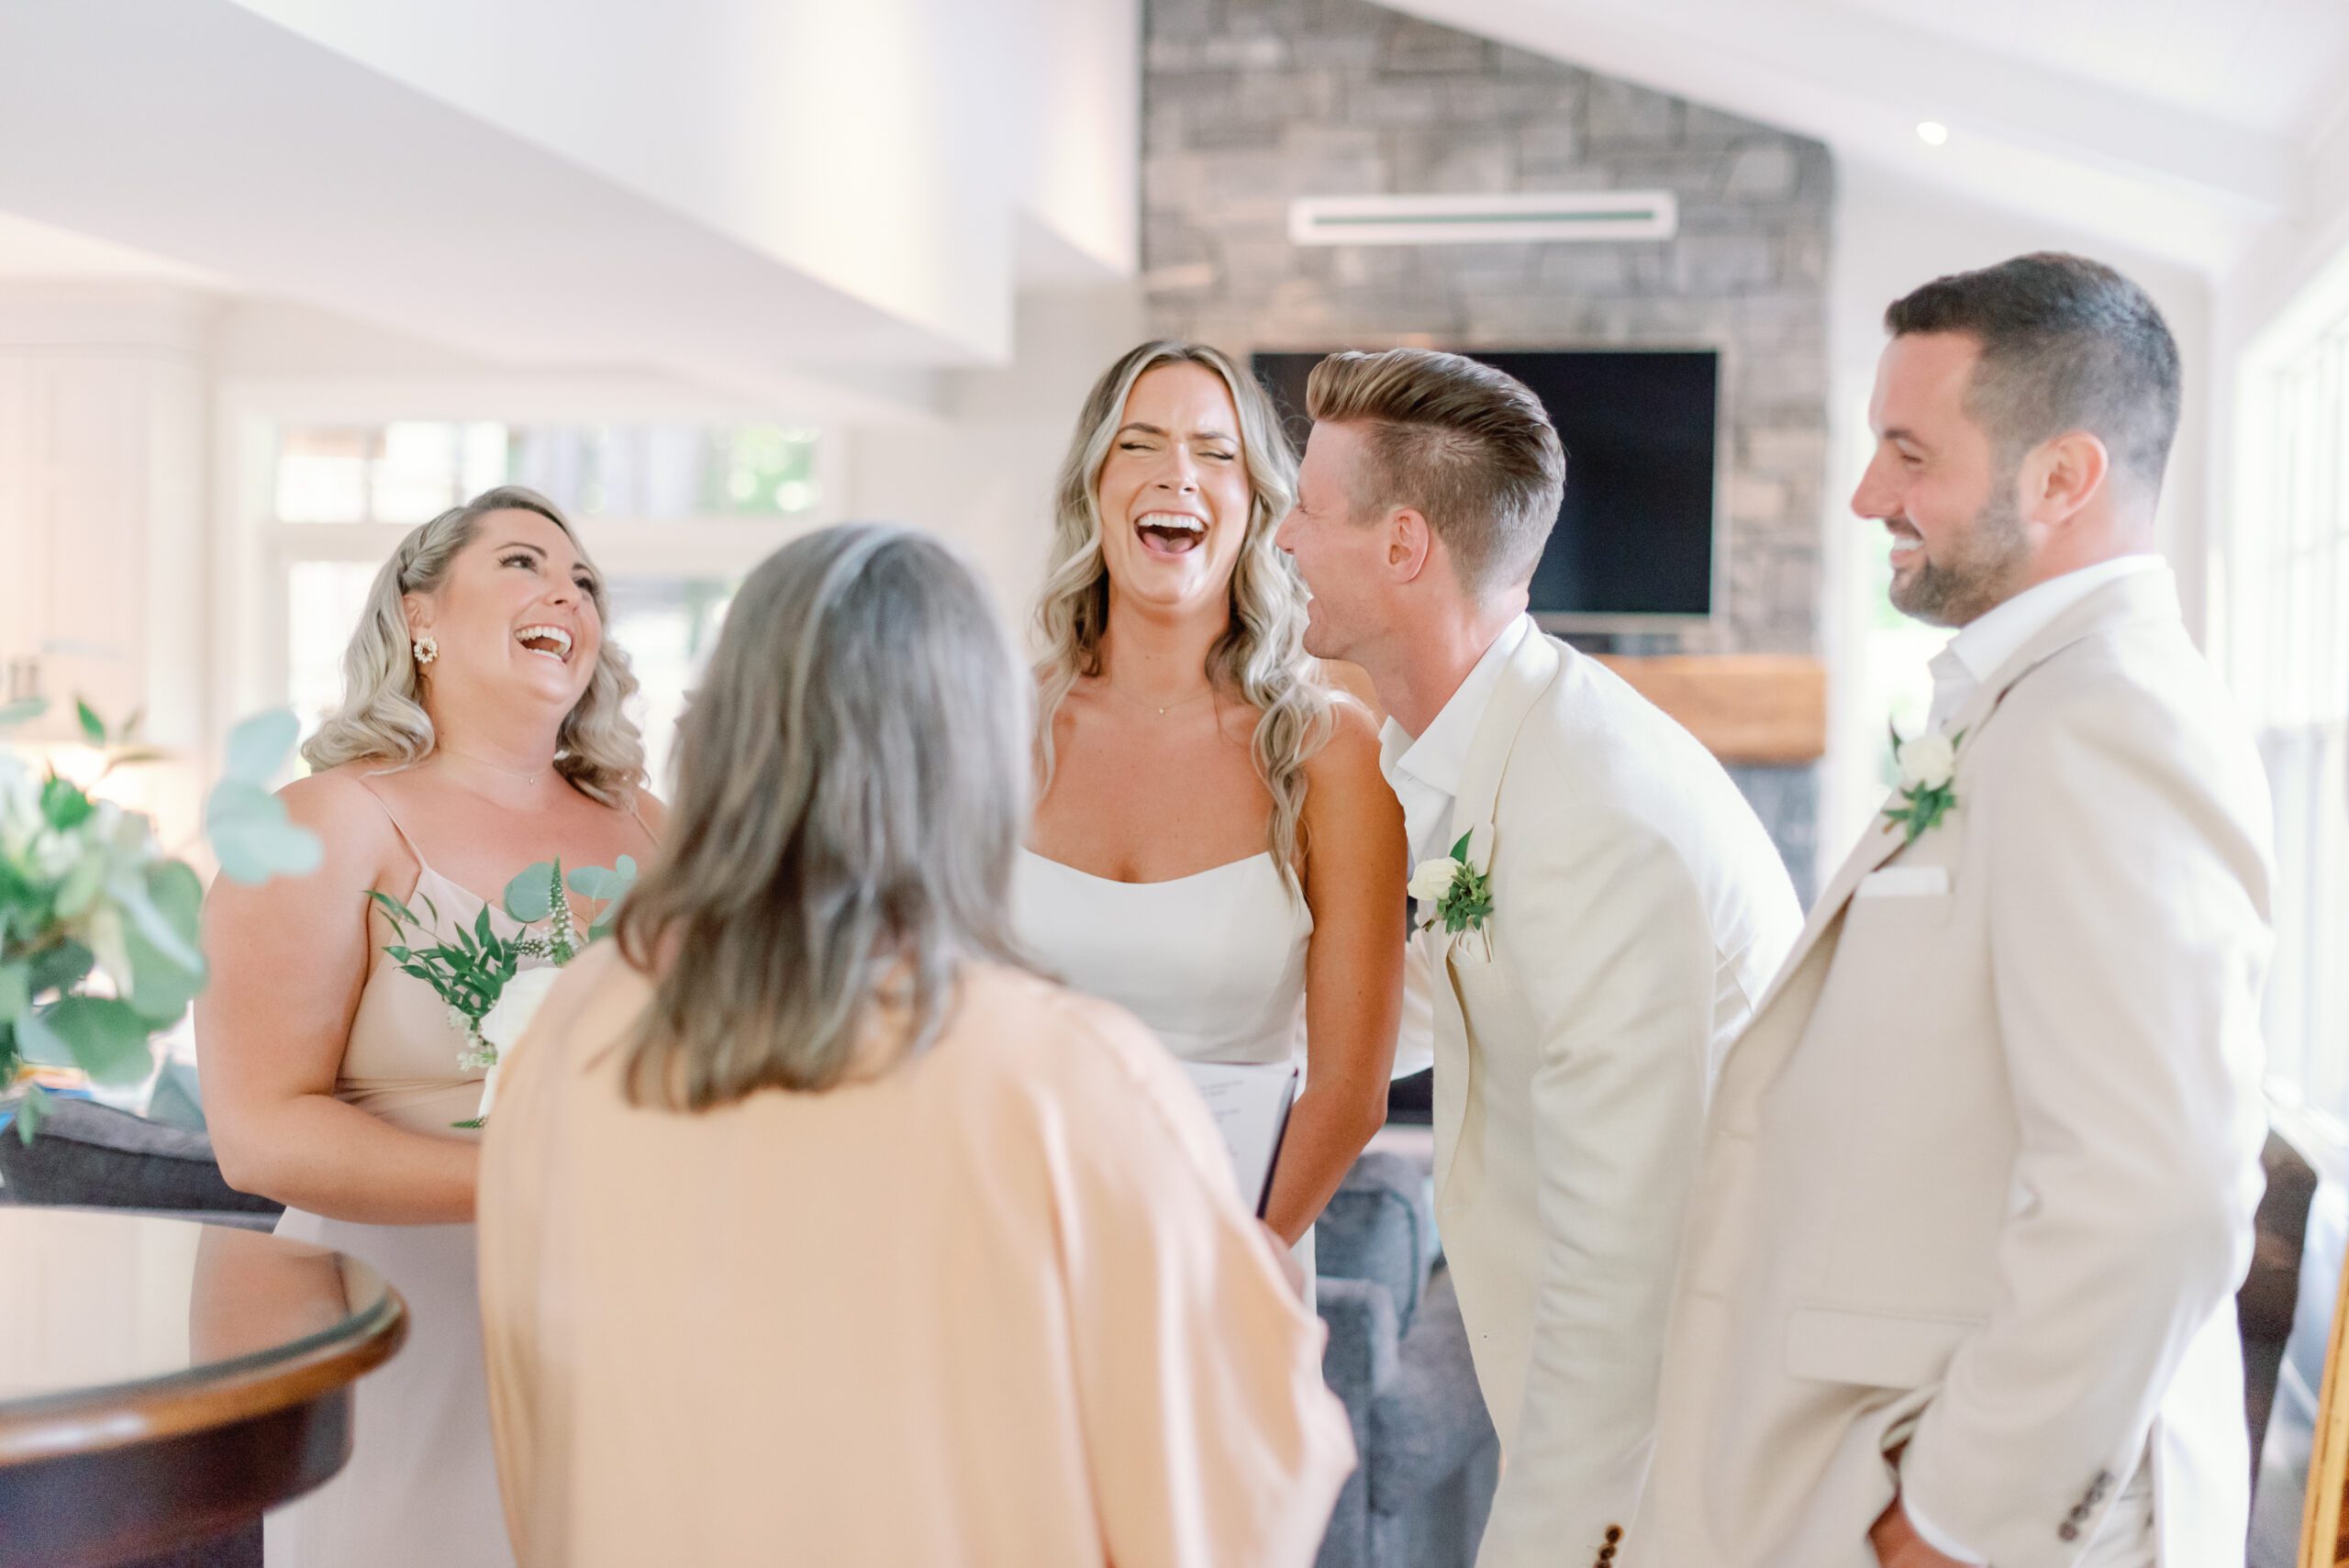 Wedding couple laughing with guests.